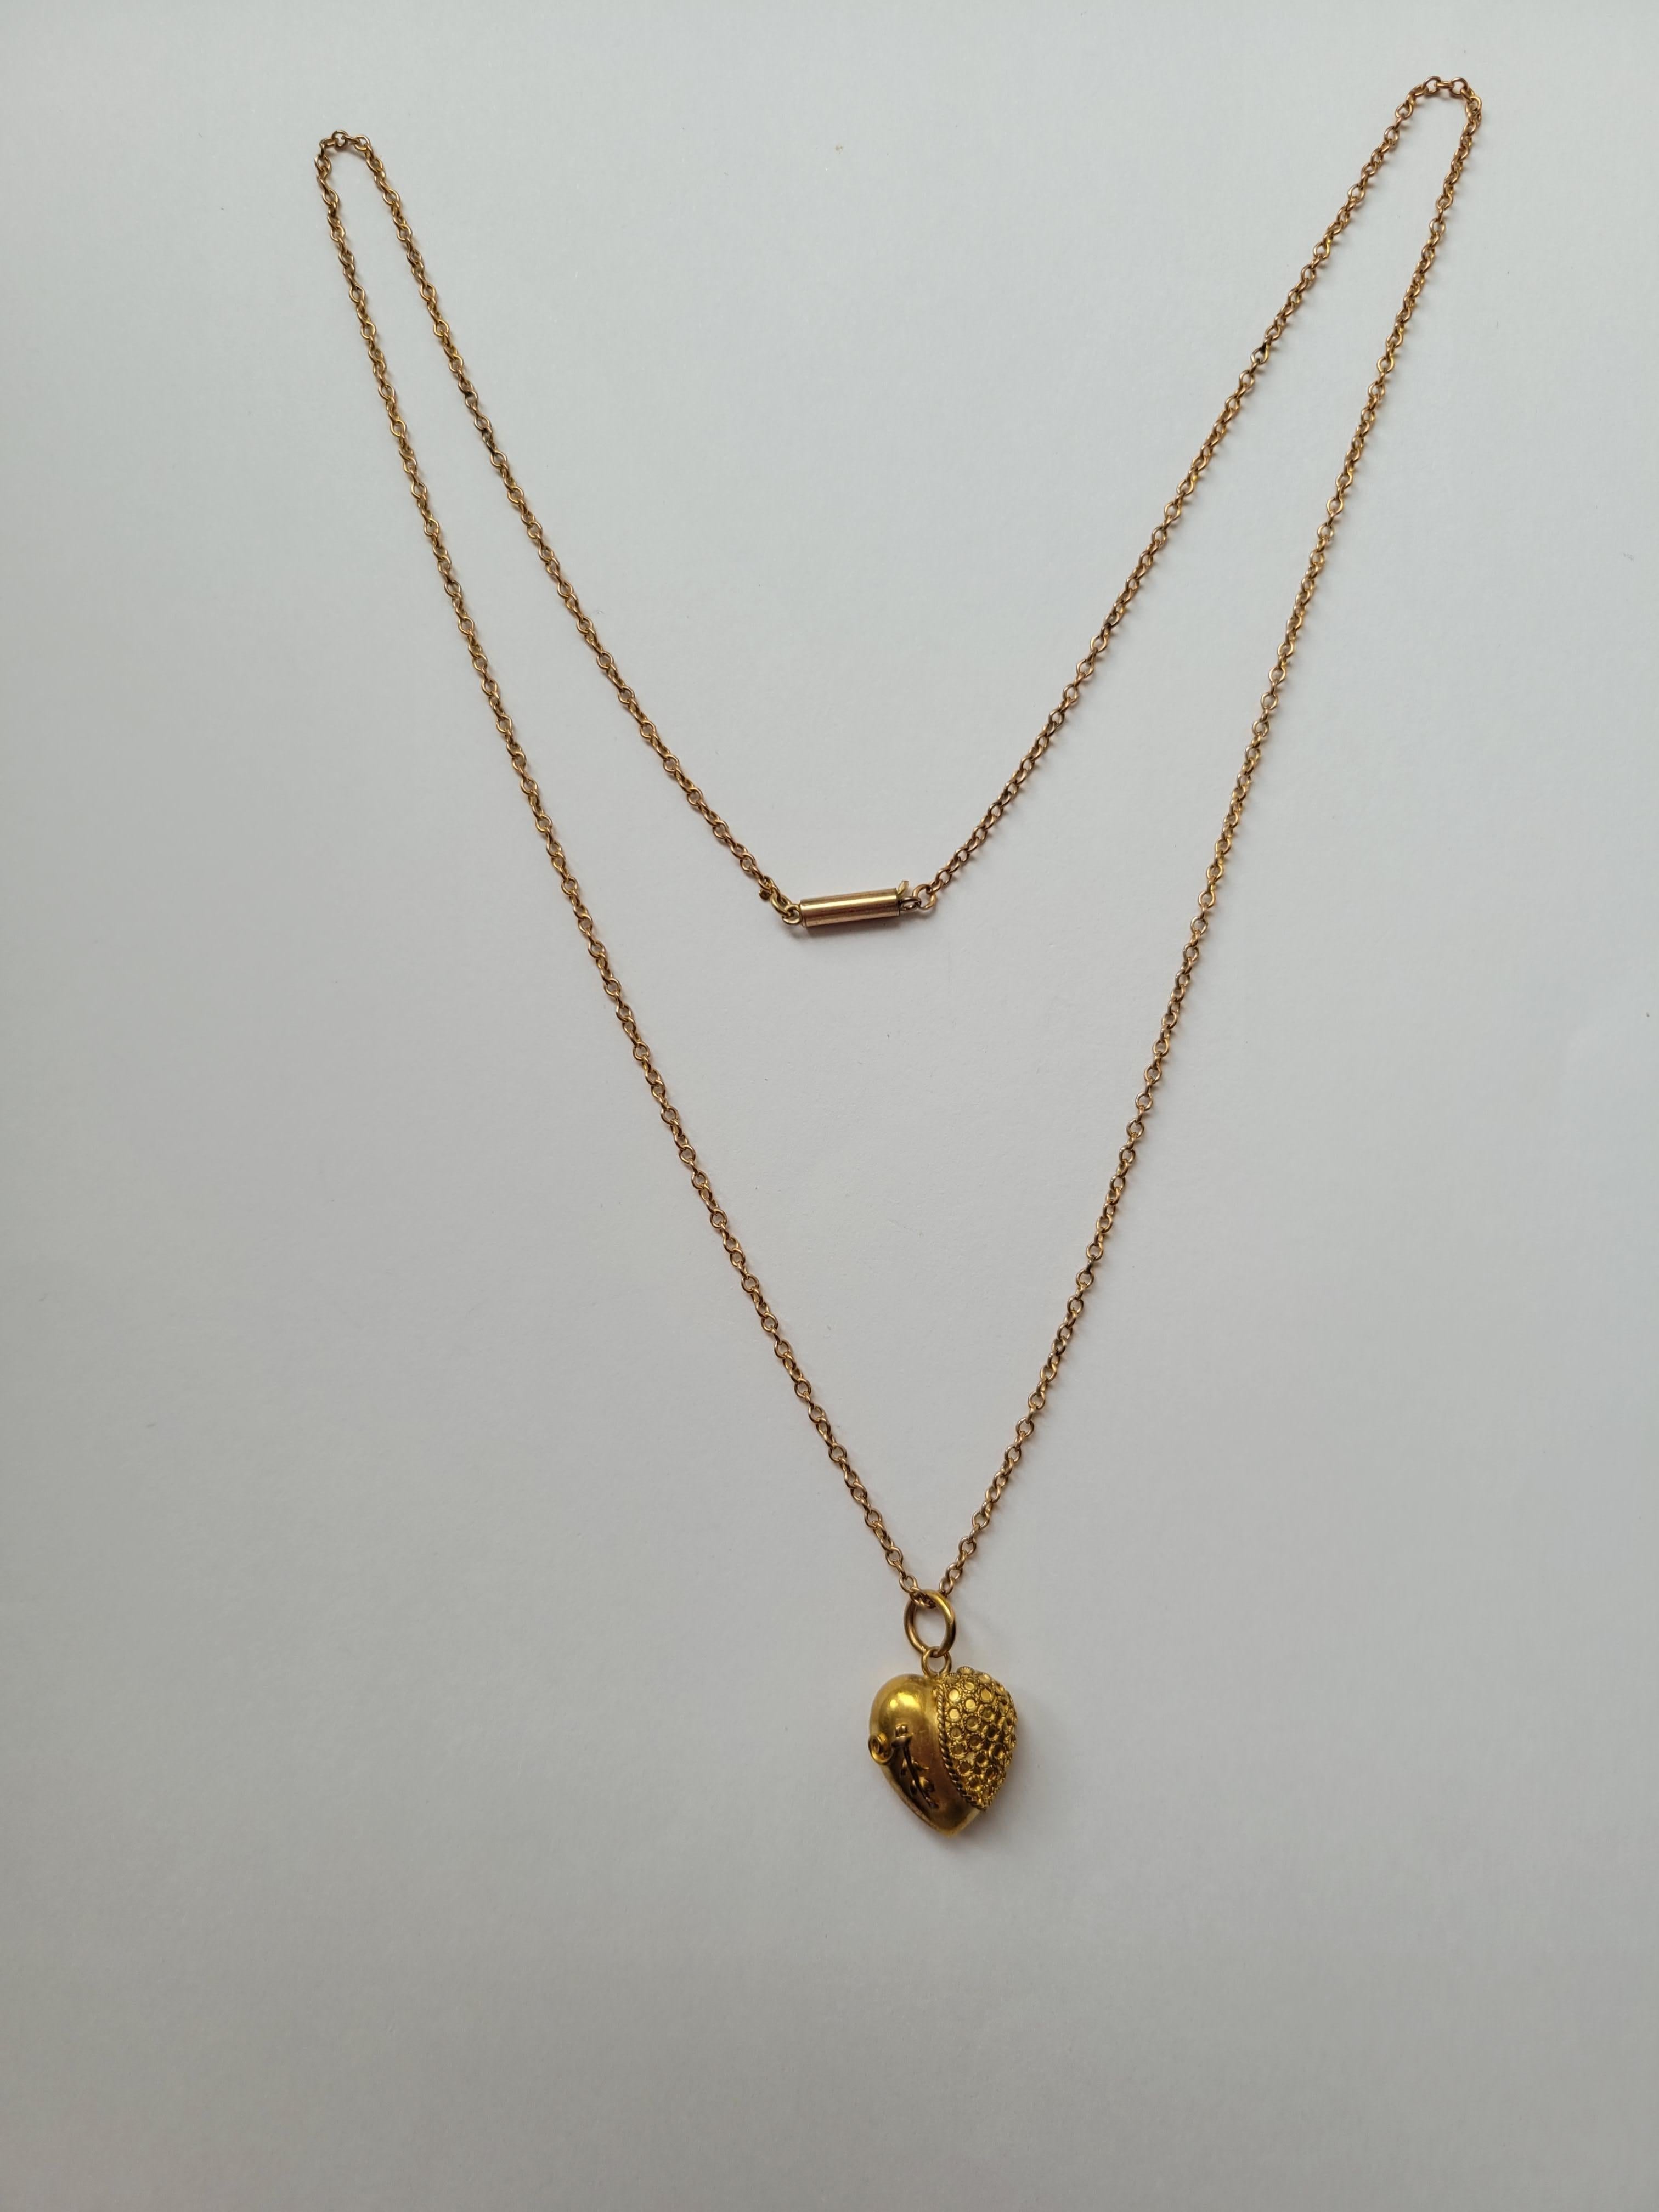 A Lovely Victorian c.1880 15 Carat Gold puffy heart pendant on original Victorian 9 Carat Gold chain. English origin. 

Pendant: drop 20mm, width 12mm.
Marked 15 CT for 15 Carat Gold. 

Chain: length 49.5cm or 19 1/2